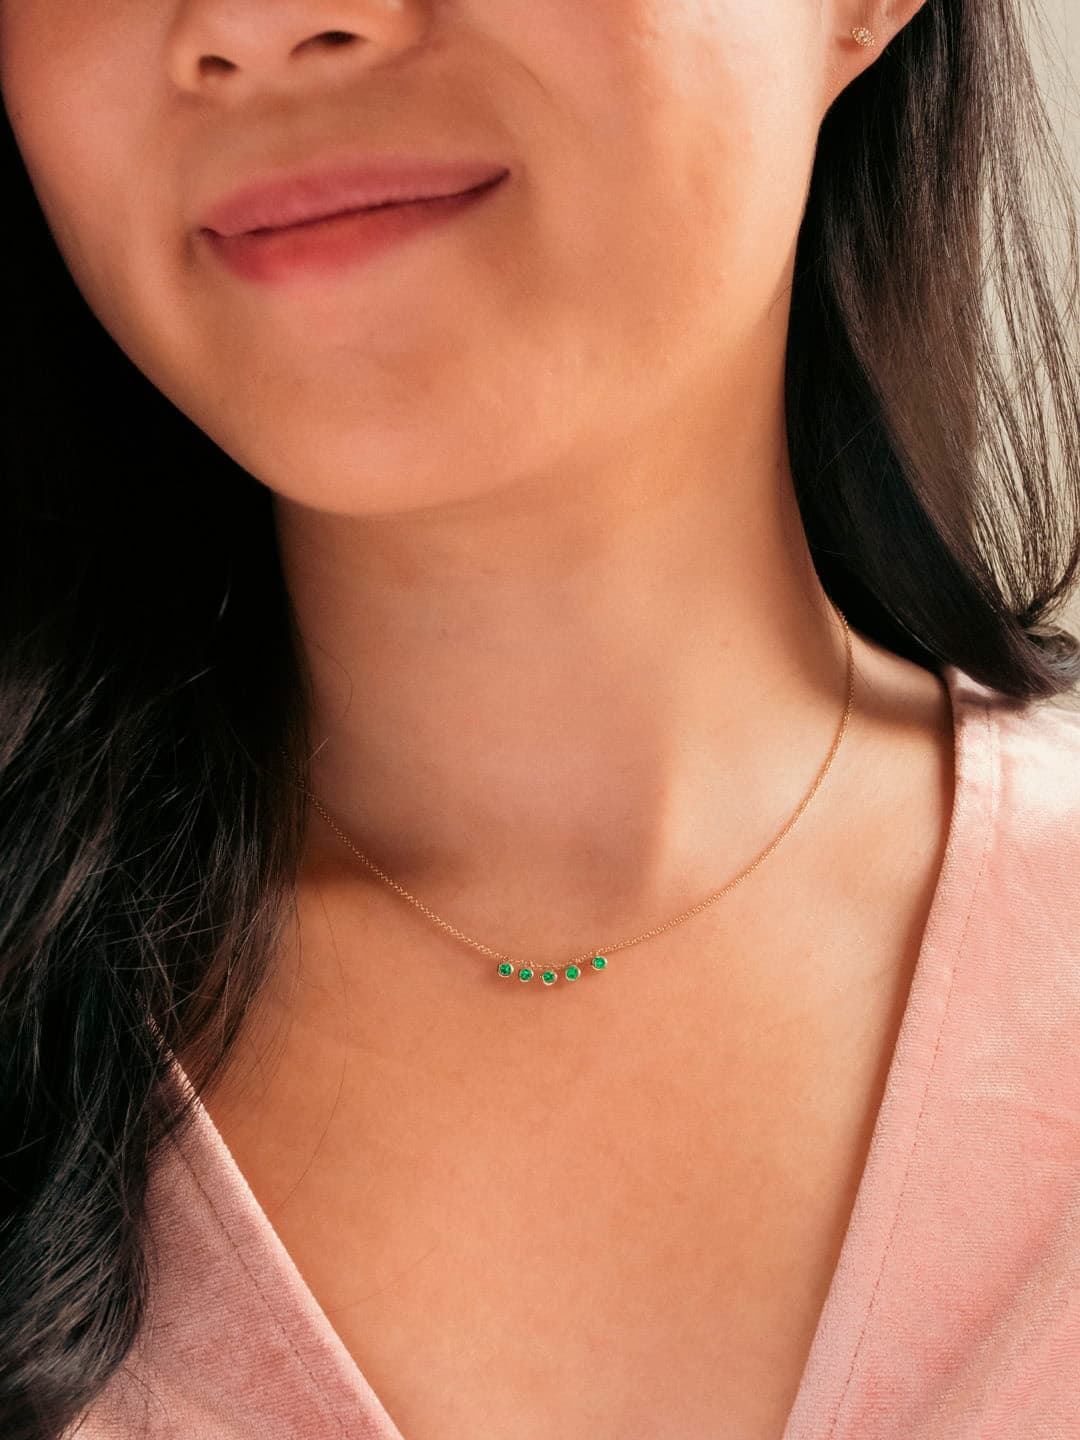 Birthstone Jewelry: Celebrating Personal Connections Every Day